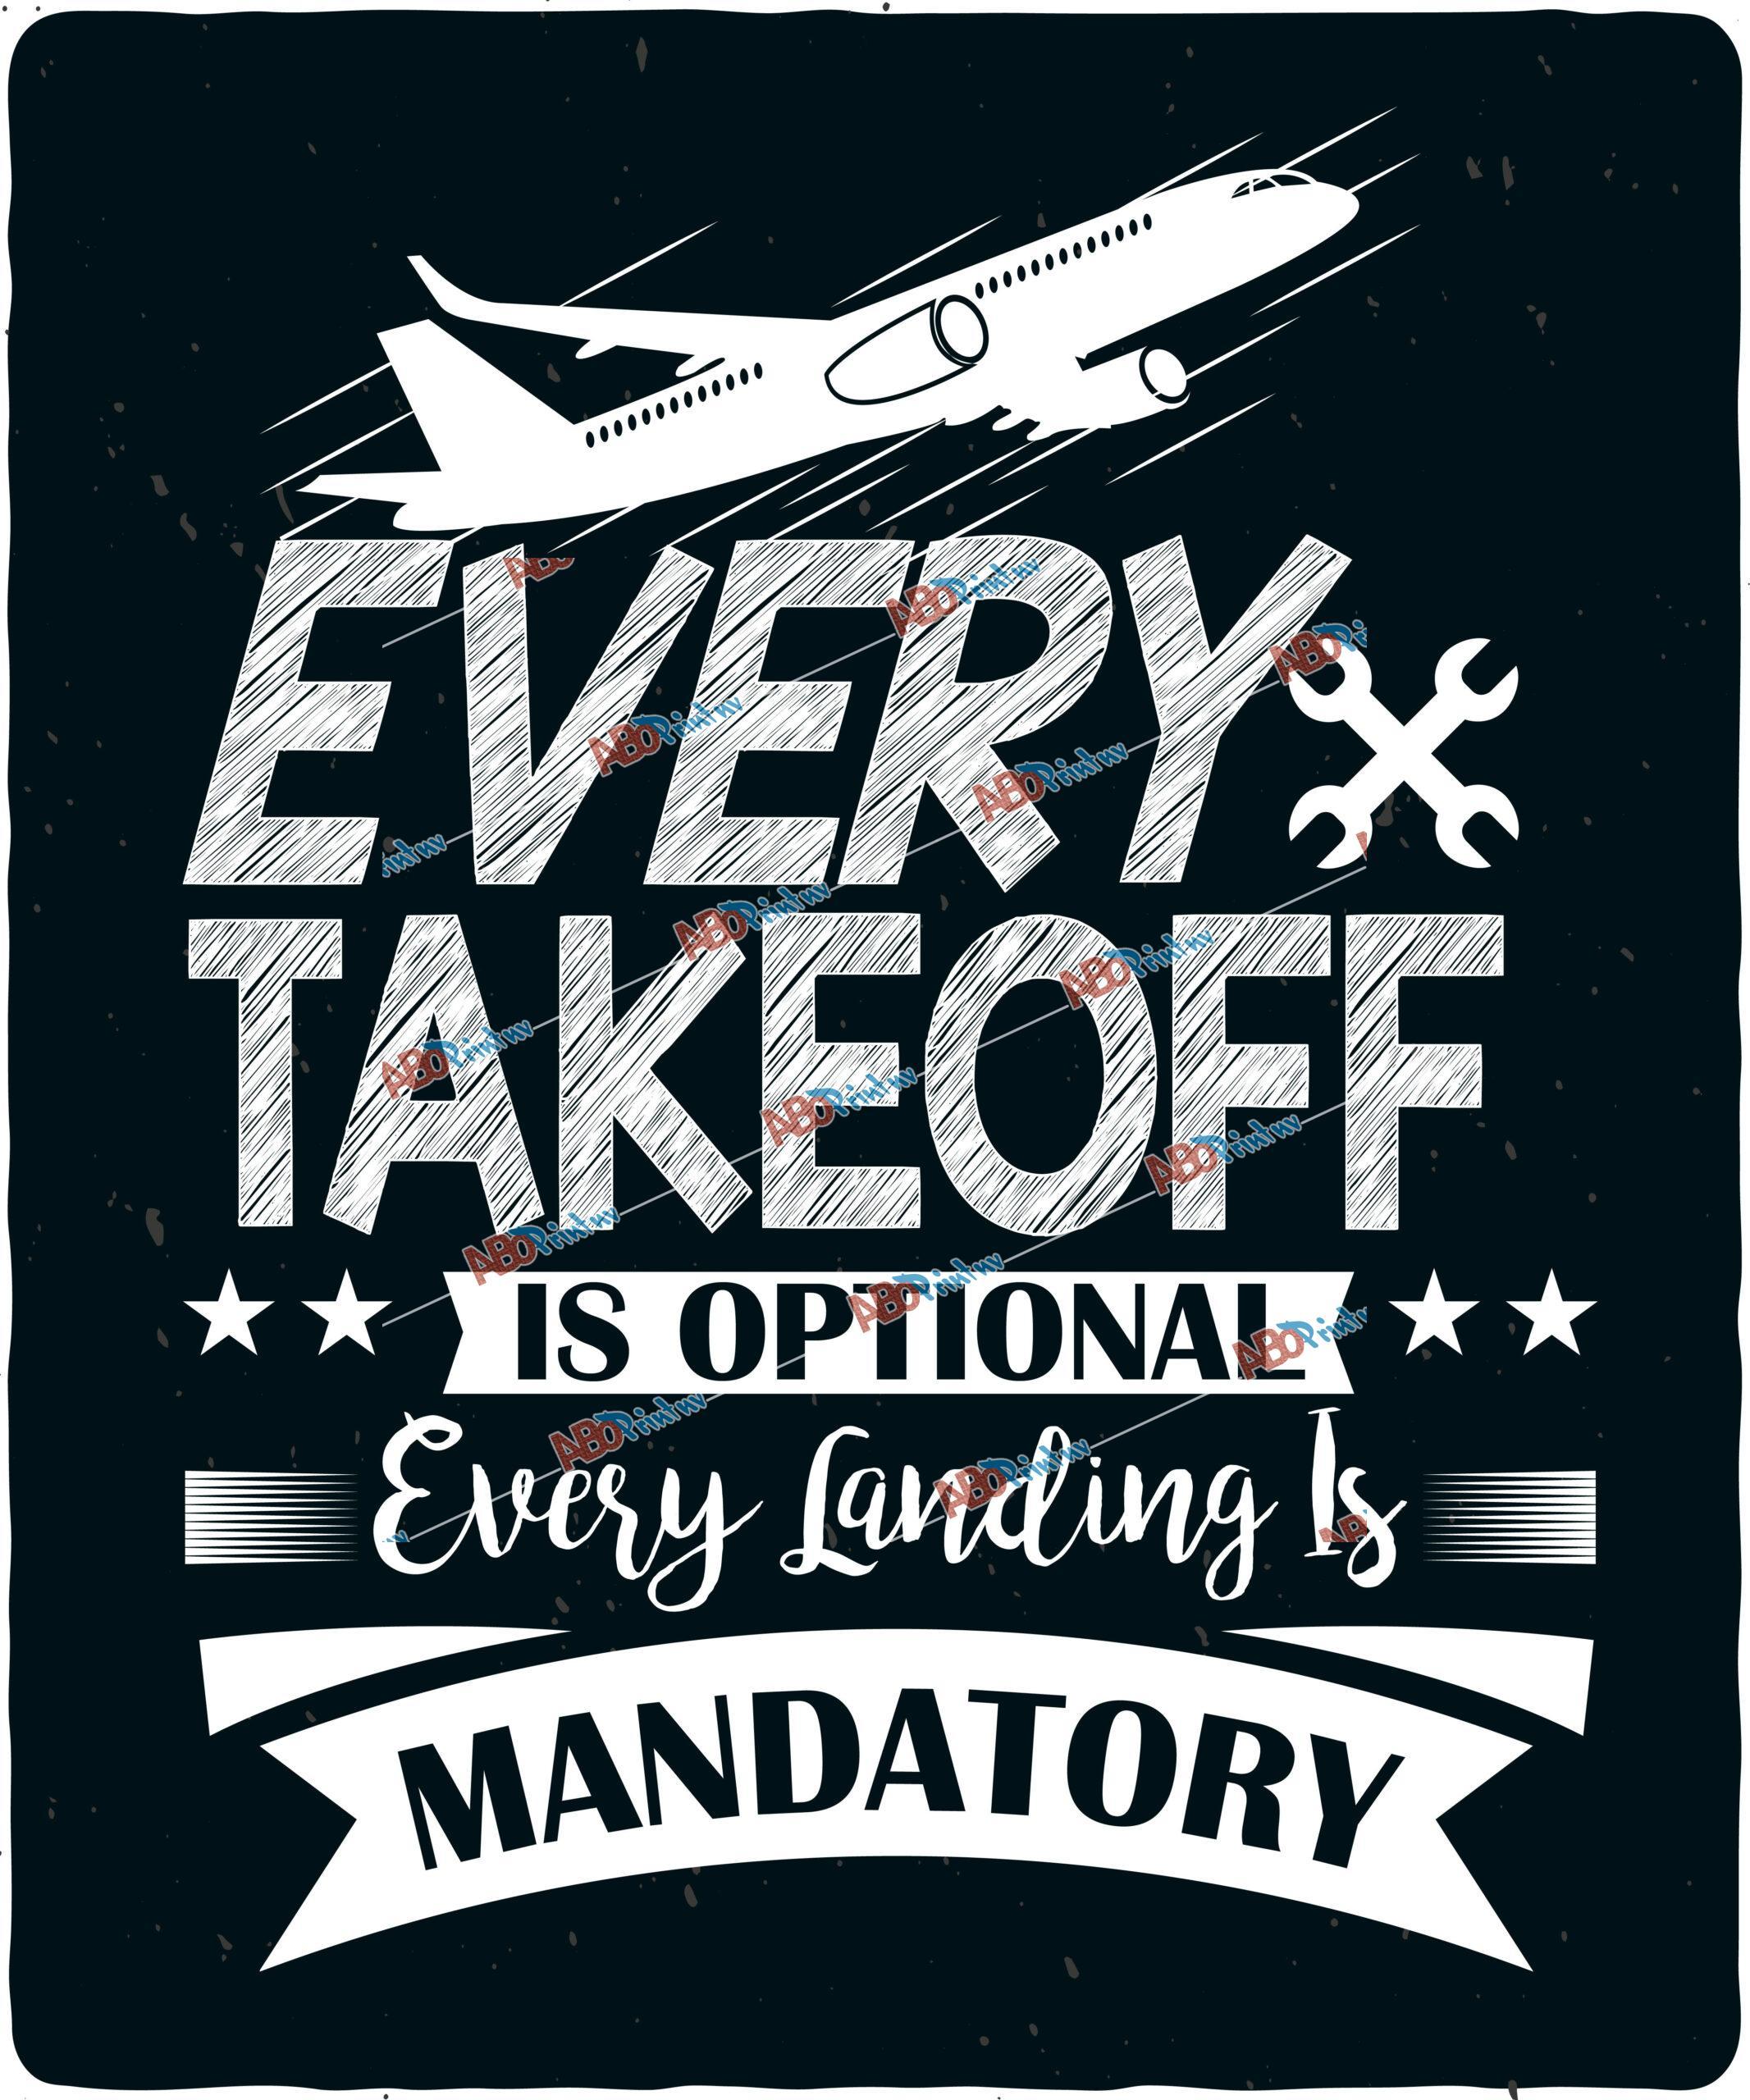 Every takeoff is optional. Every landing is mandatory